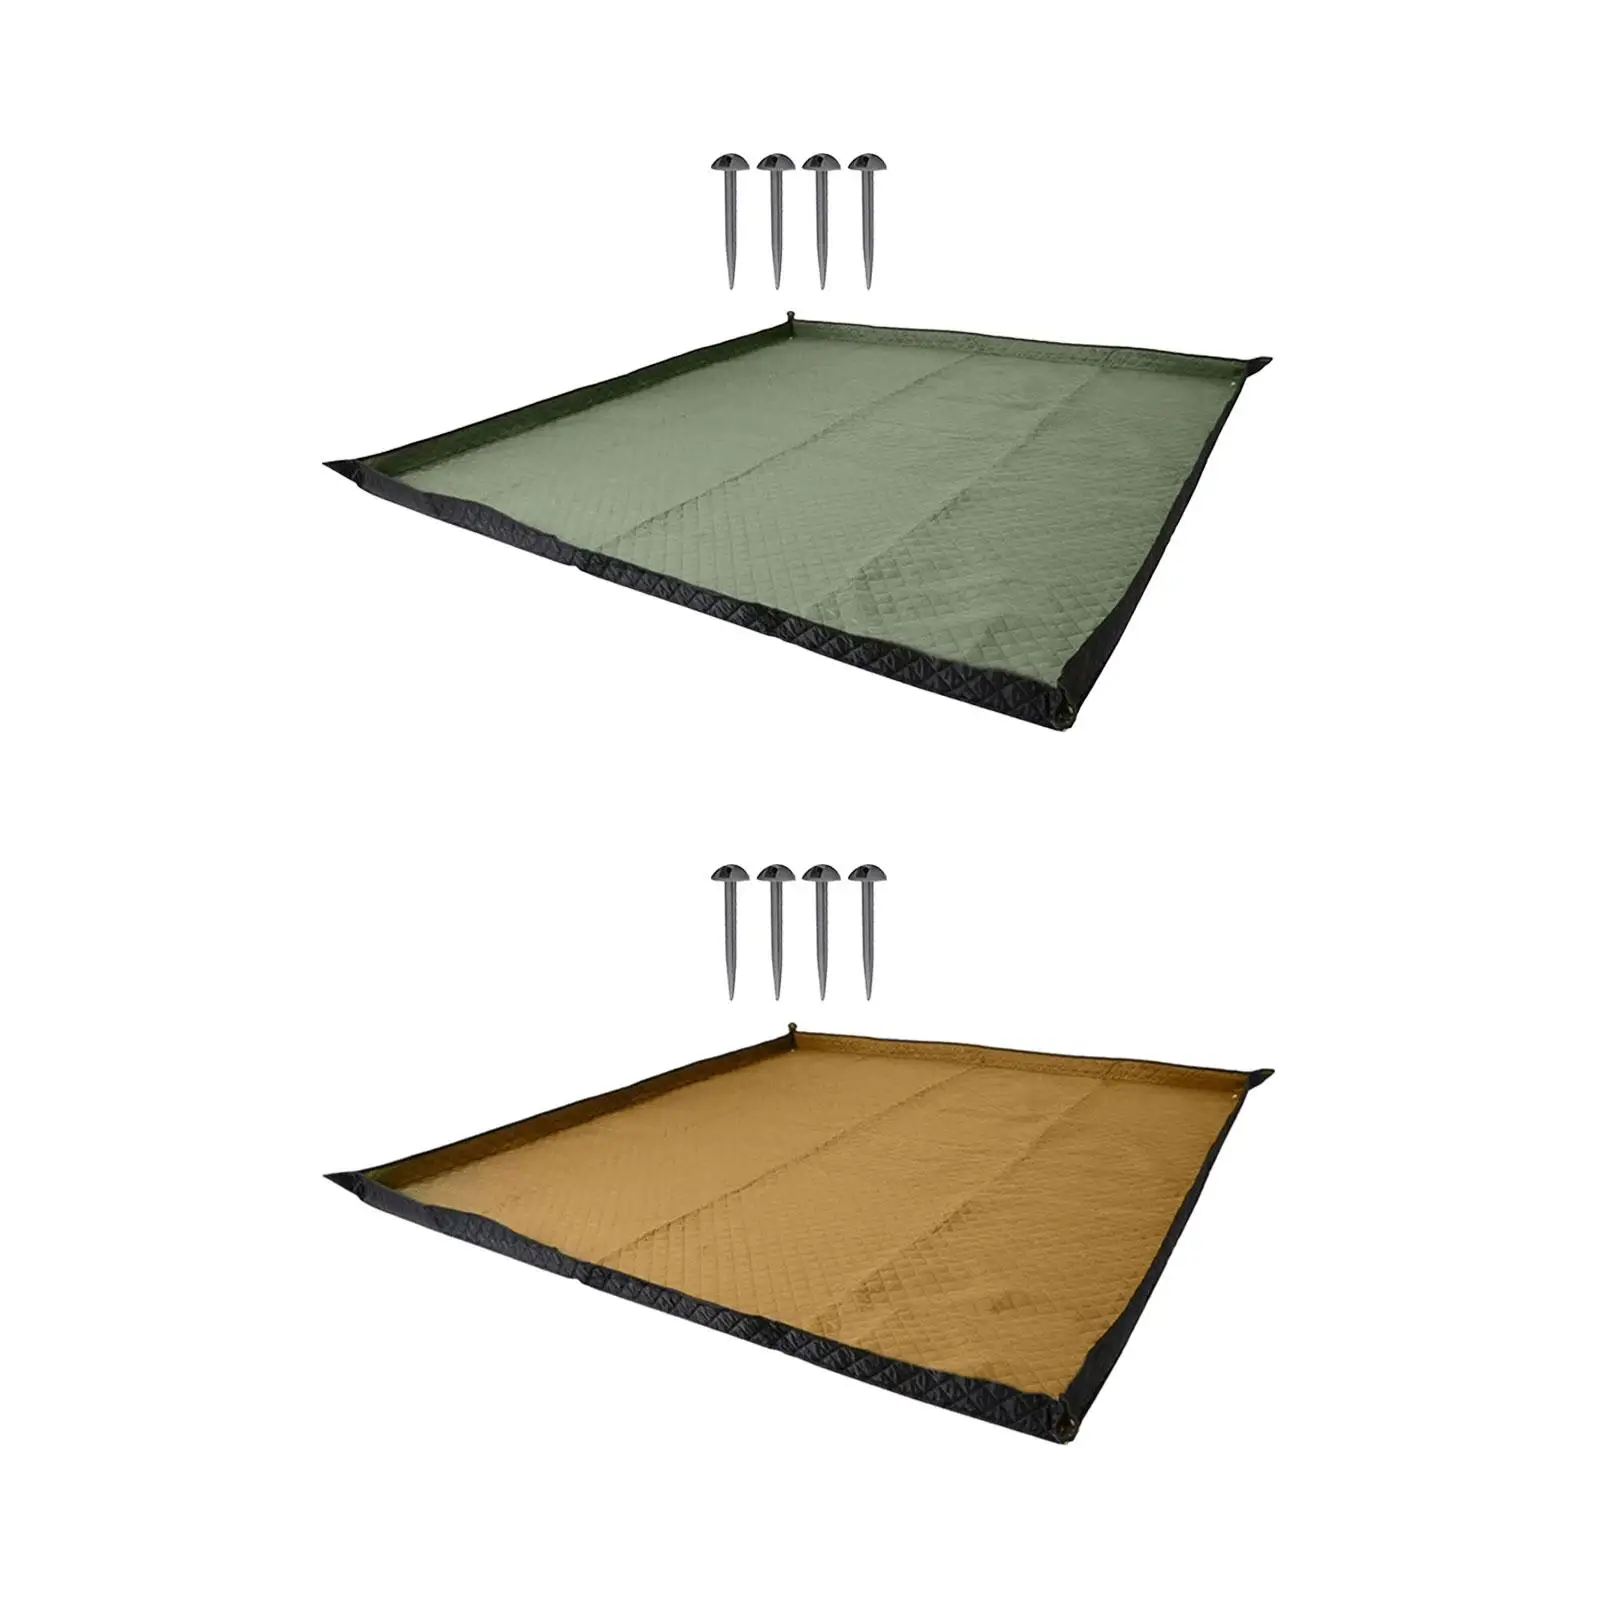 Camping Blanket with Carry Strap Rug with 4 Nails 200cmx200cm Portable Foldable Tent Pad for Family Party Hiking Outdoor Travel